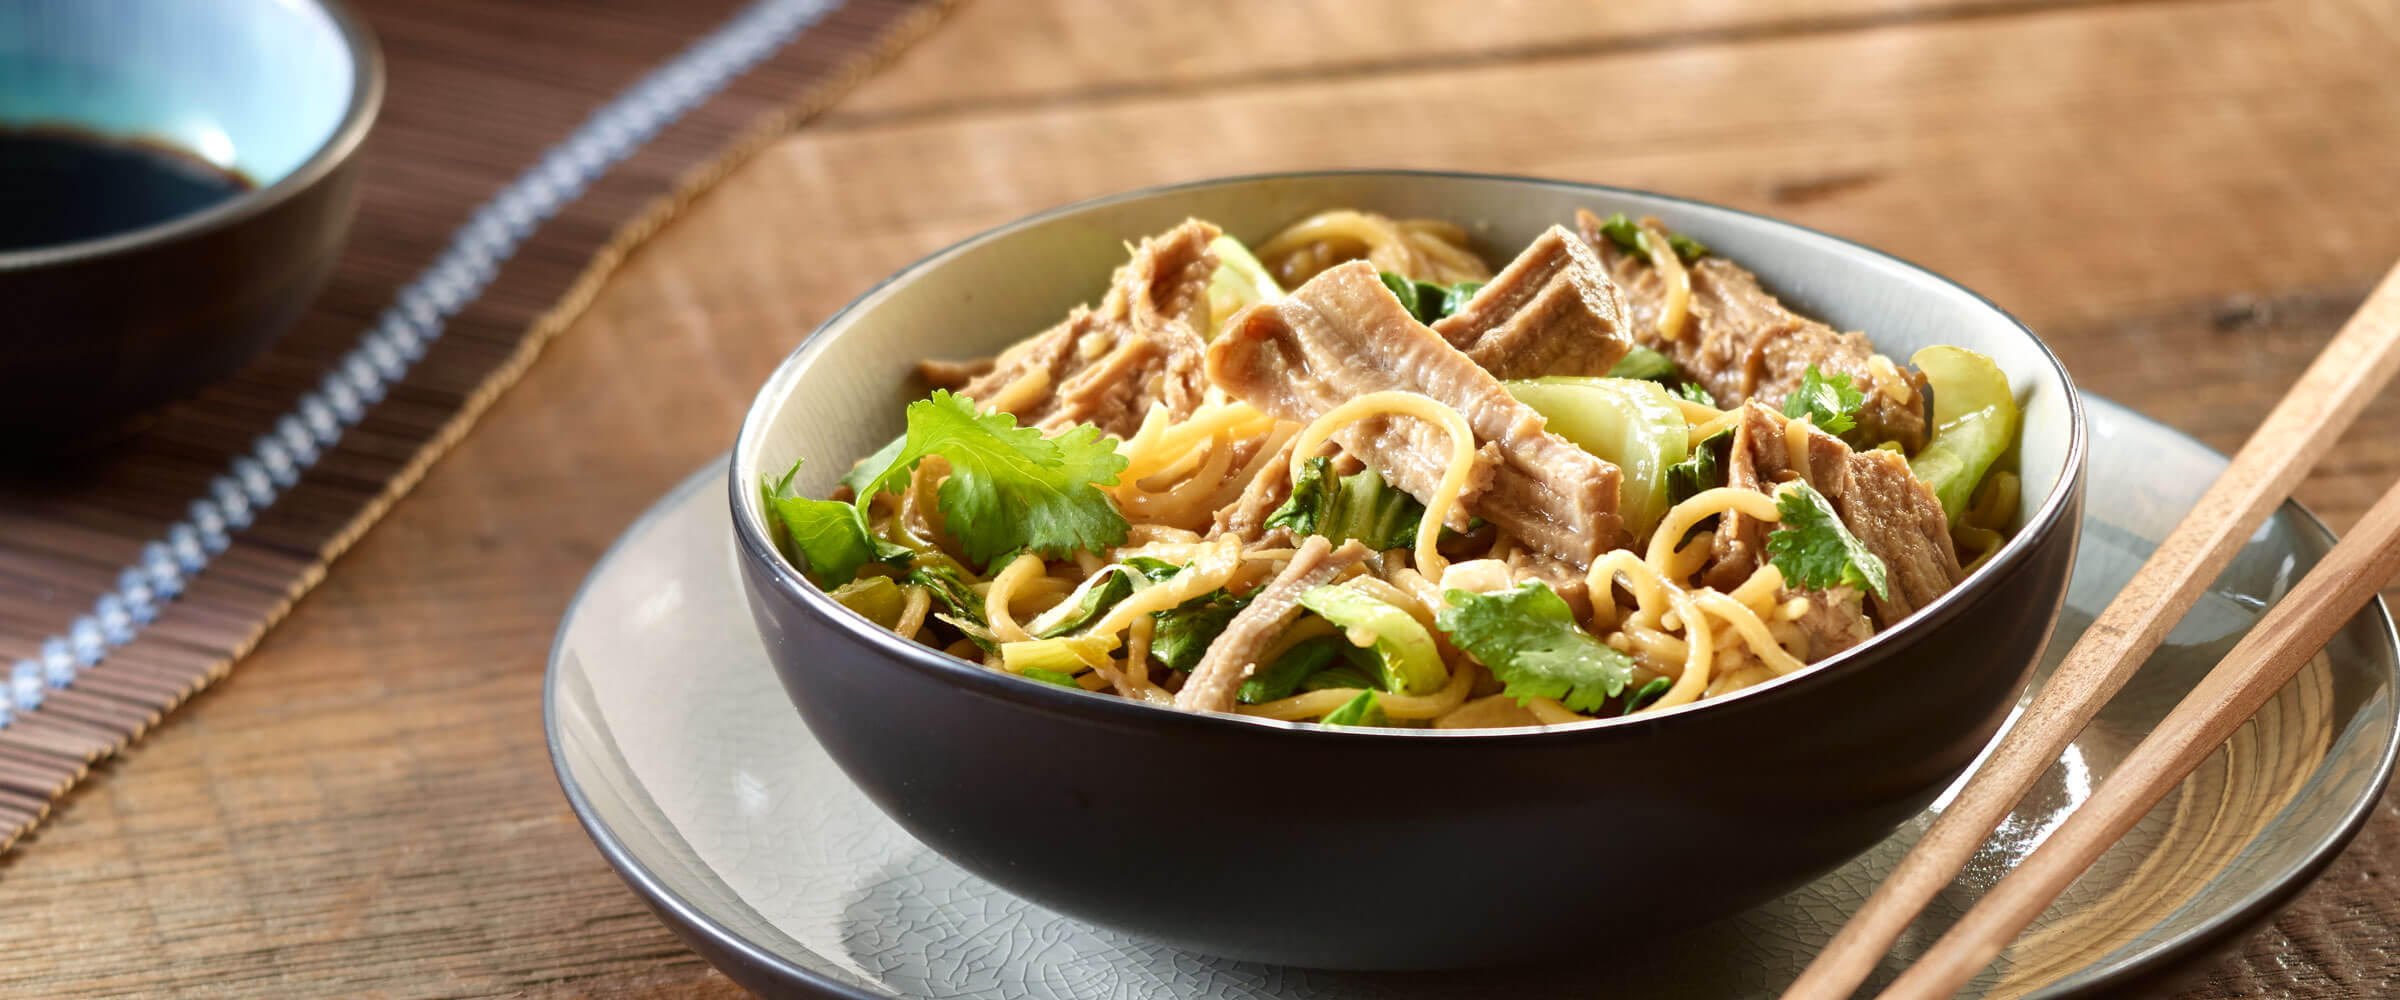 Slow Cooker Pork with Noodles in black bowl with chop sticks